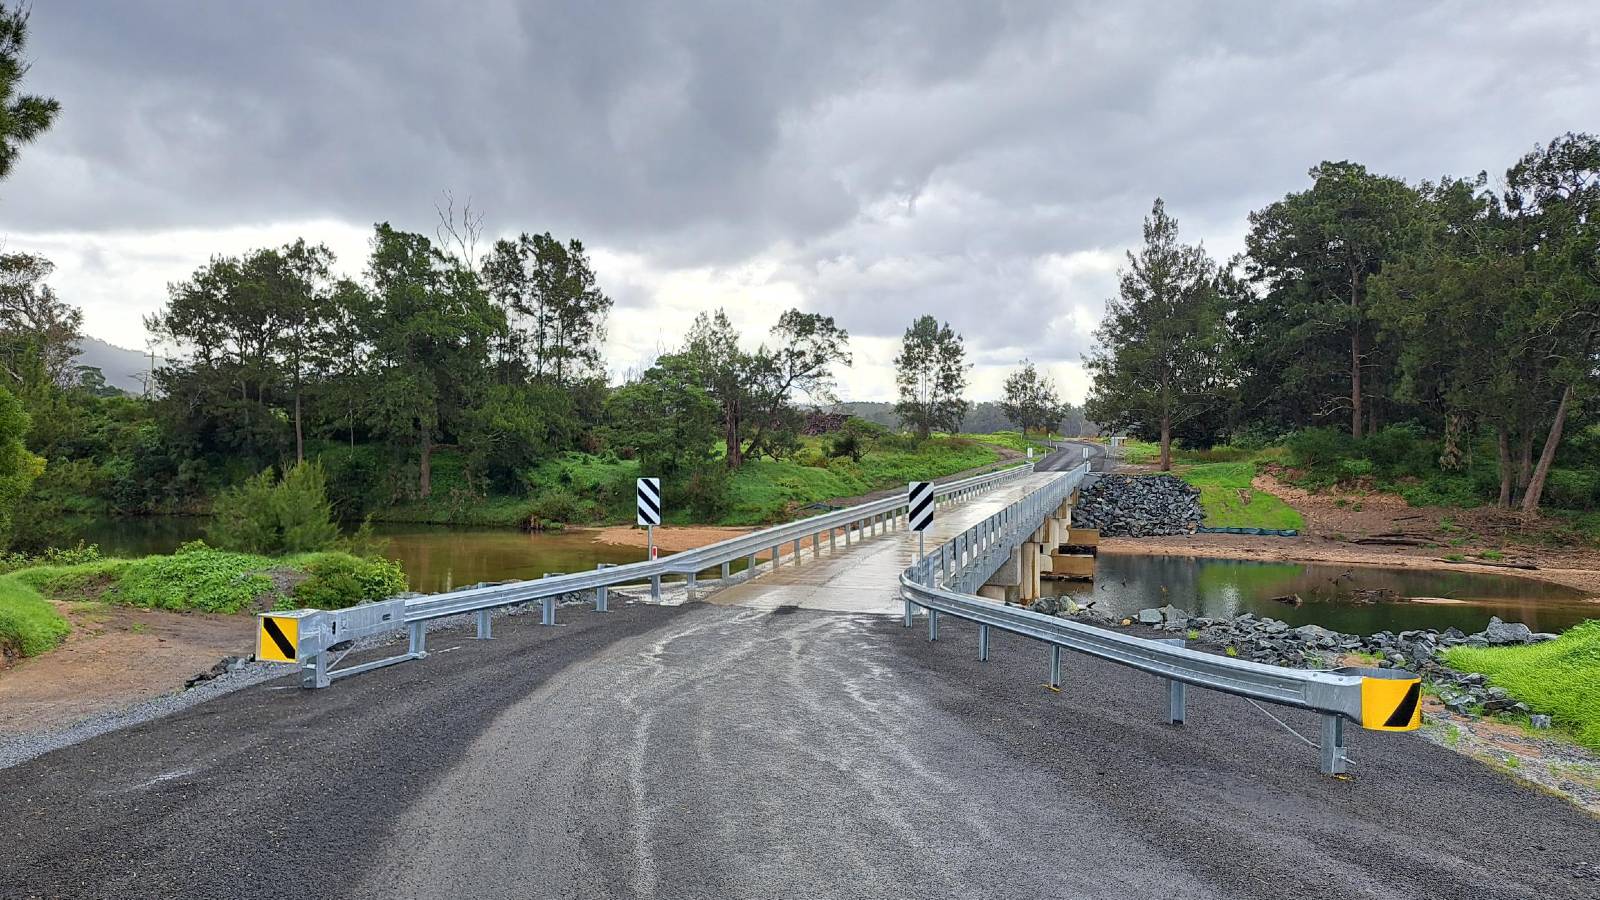 A sealed road leads to a long bridge lined with guardrail in a rural setting.